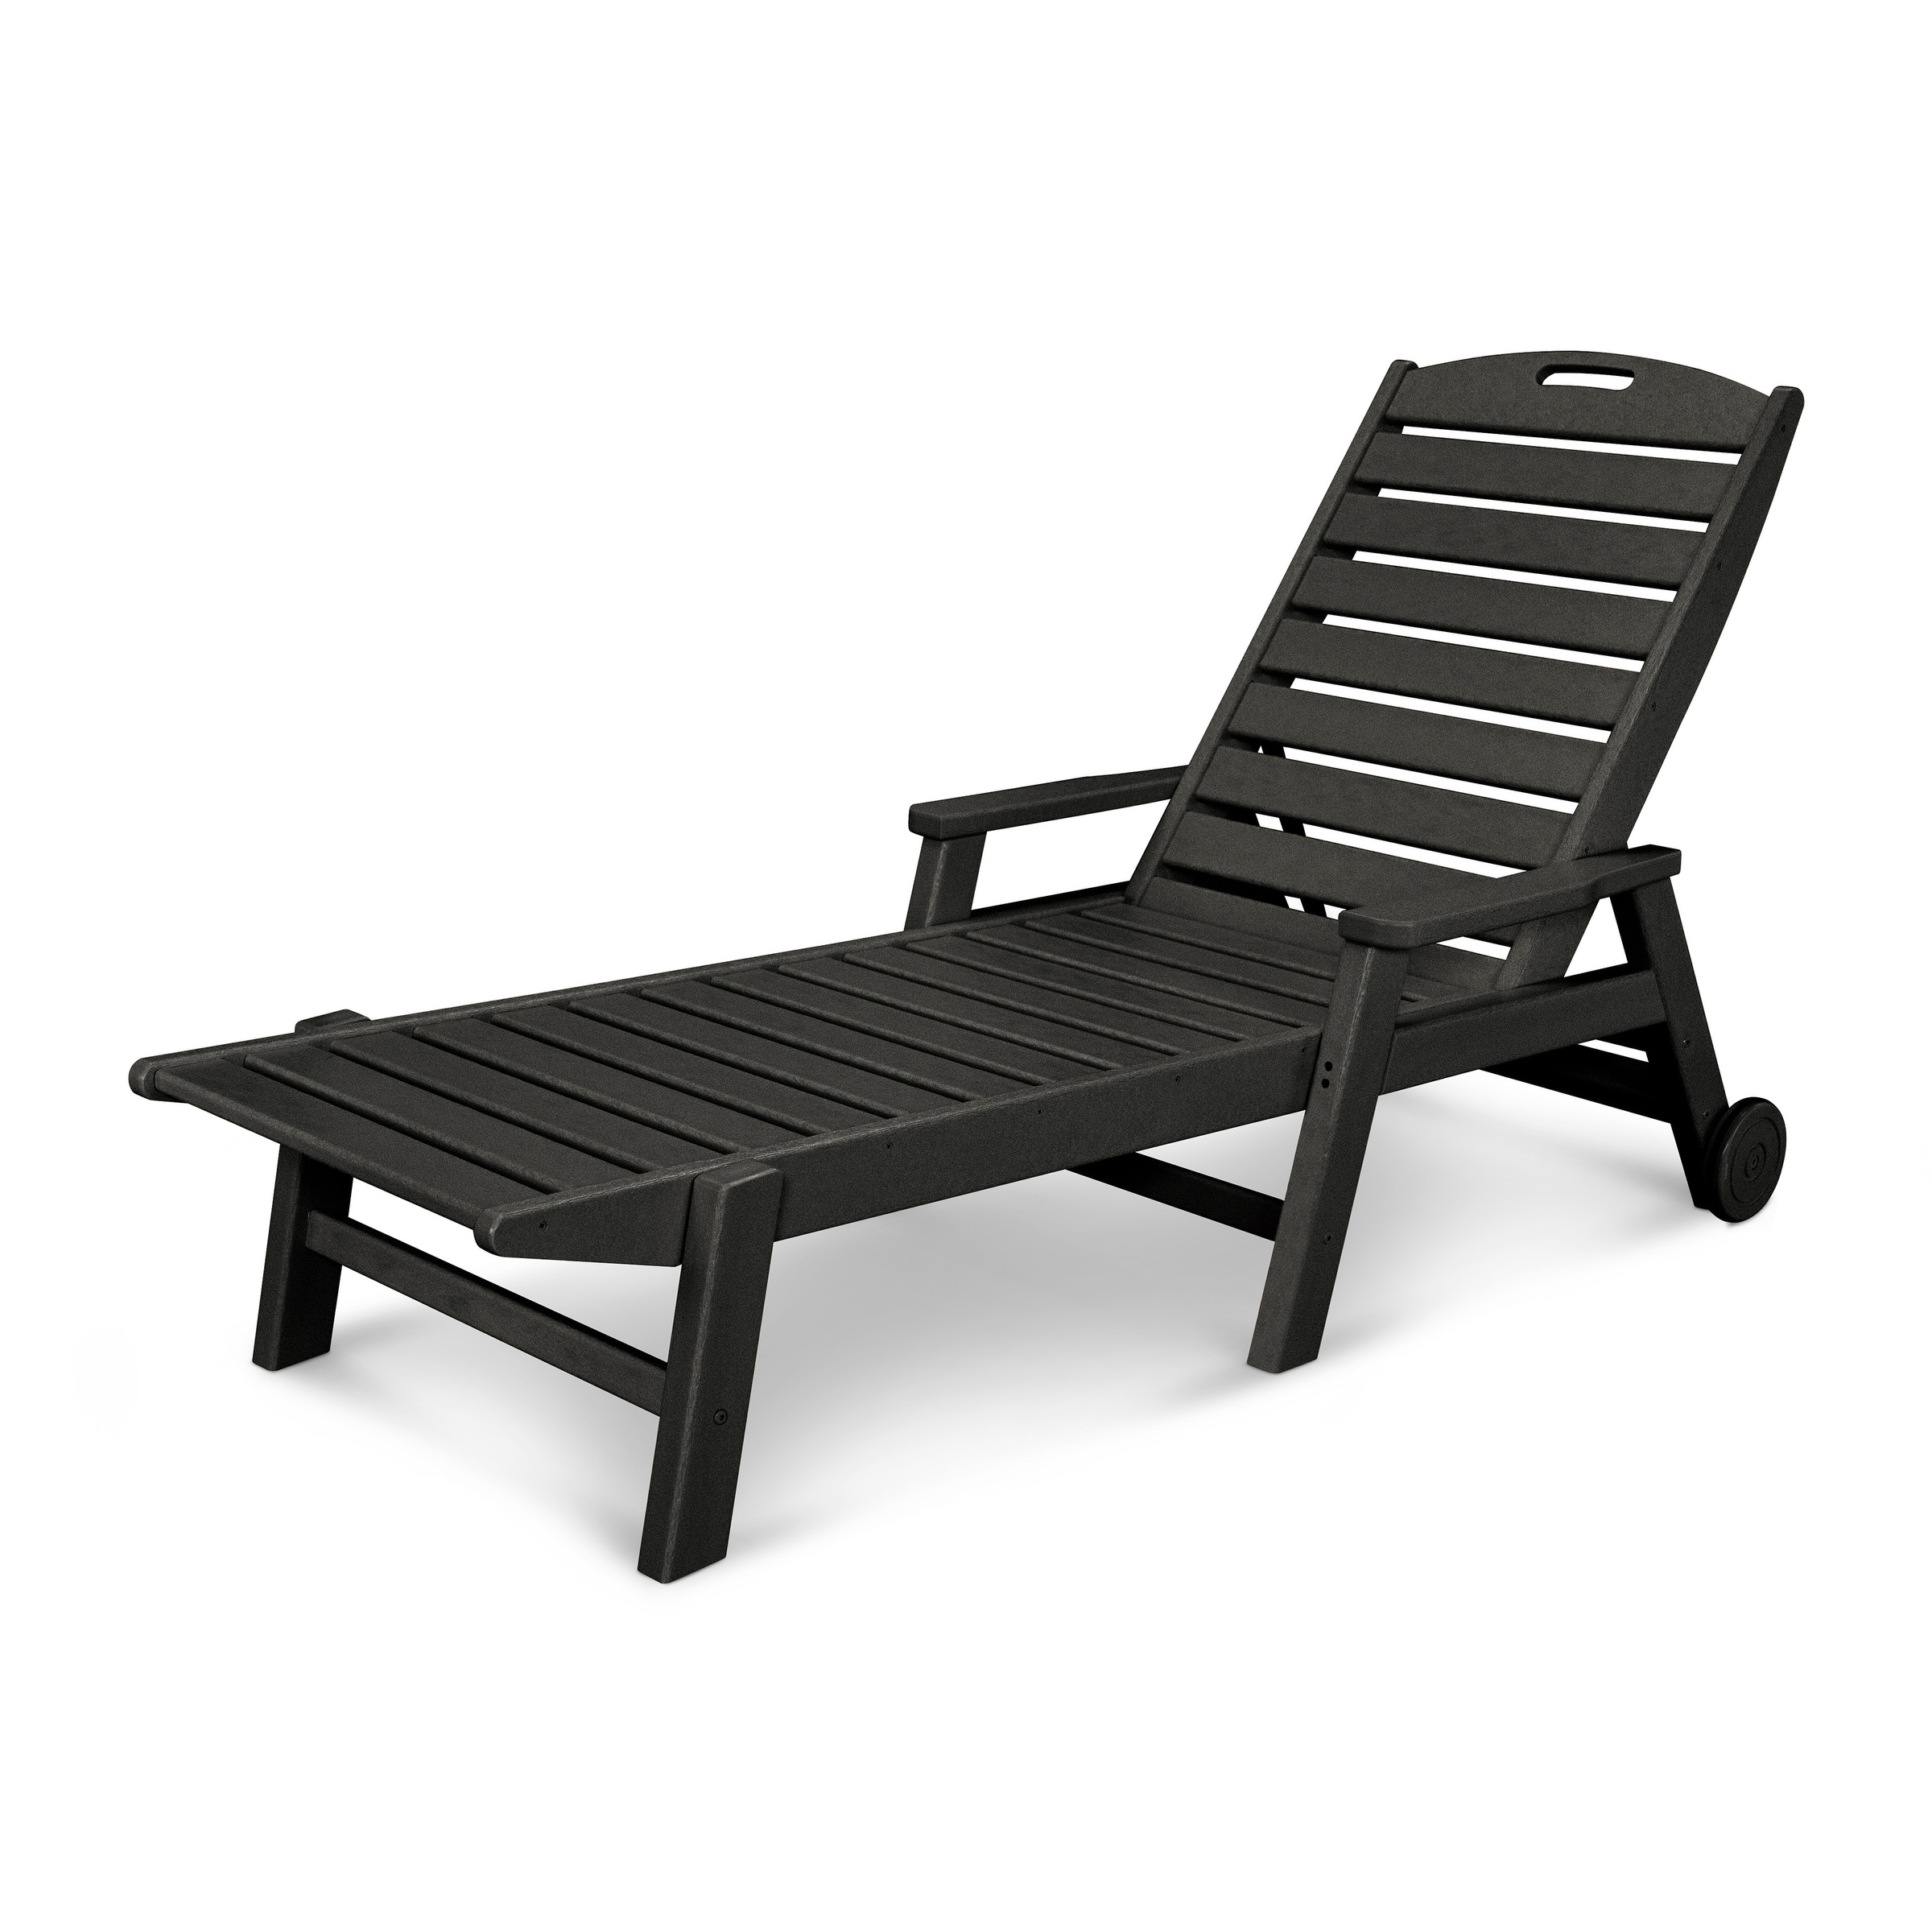 Polywood Nautical Chaise Lounge With Arms And Wheels